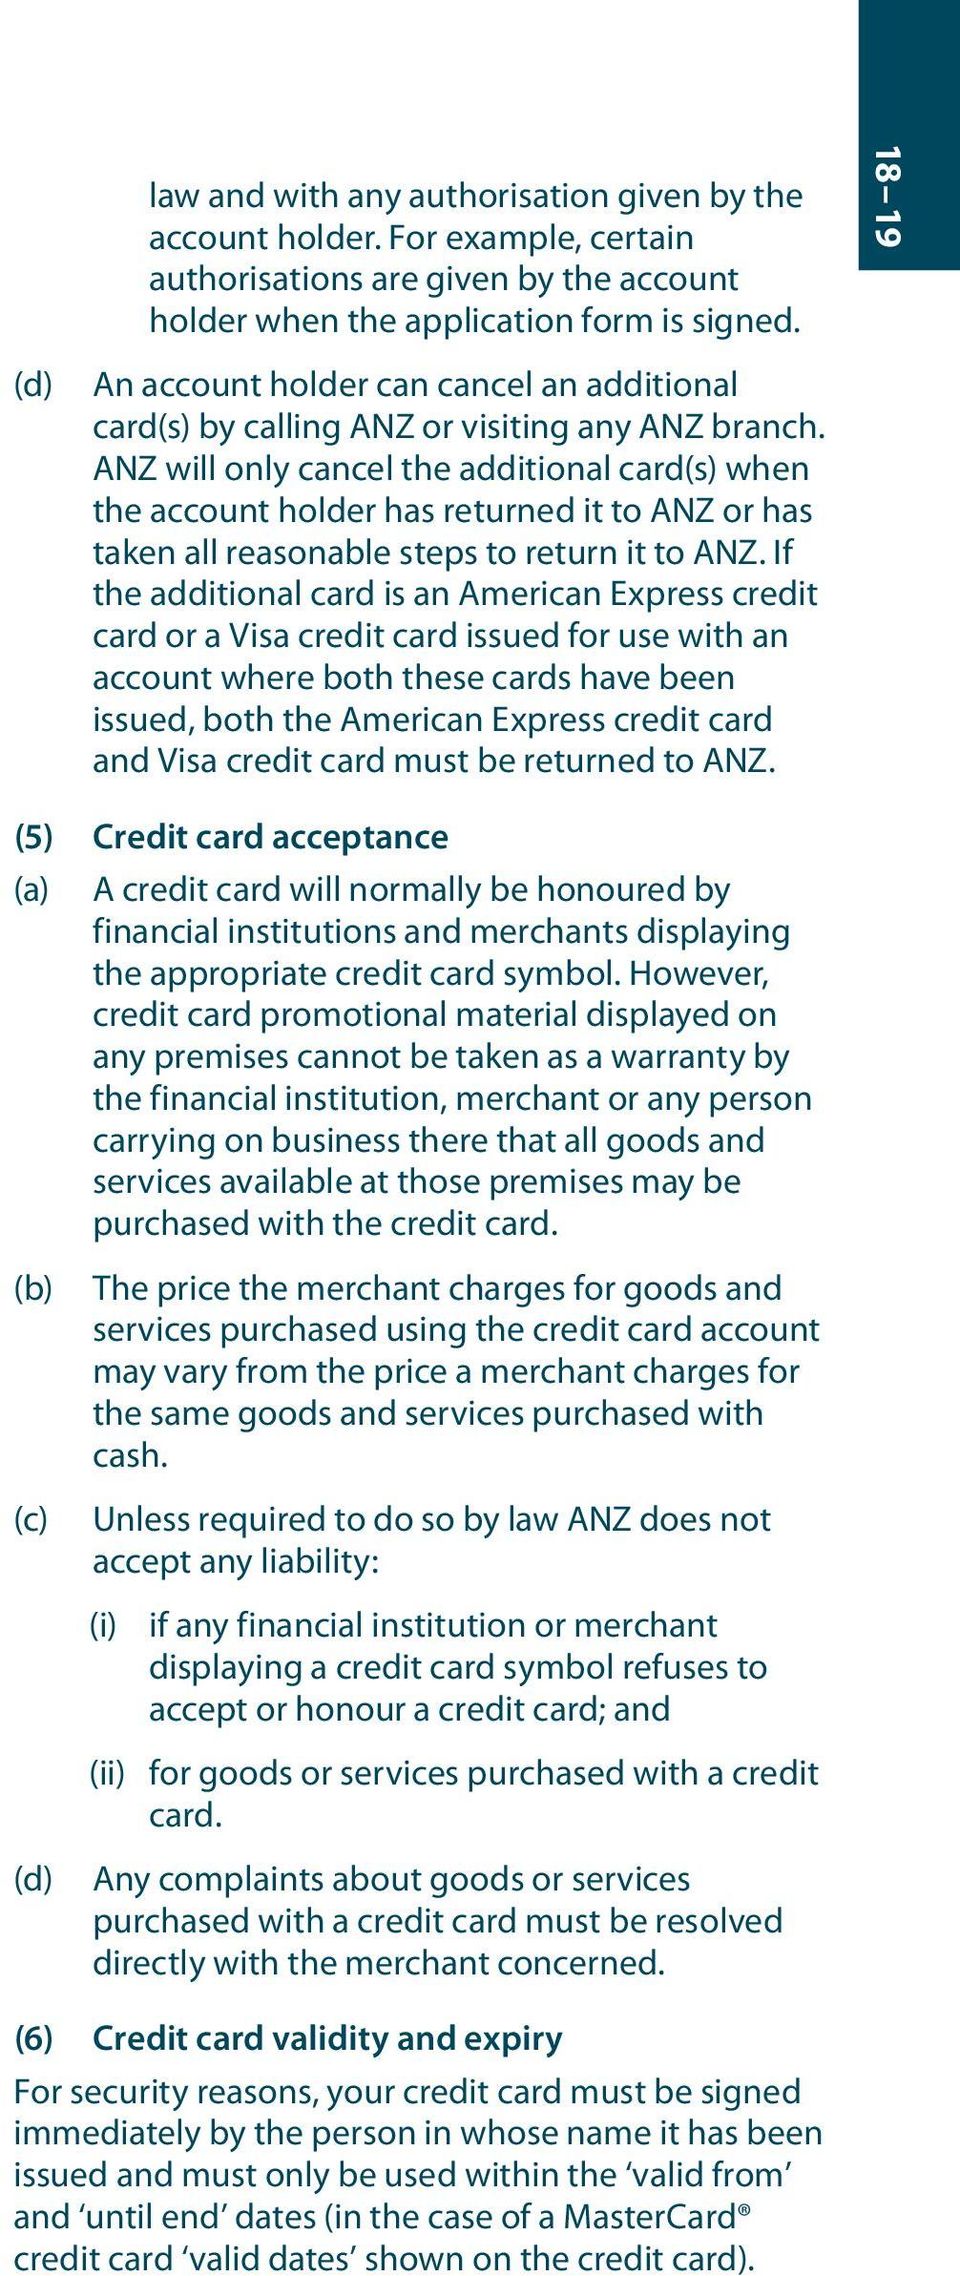 ANZ will only cancel the additional card(s) when the account holder has returned it to ANZ or has taken all reasonable steps to return it to ANZ.